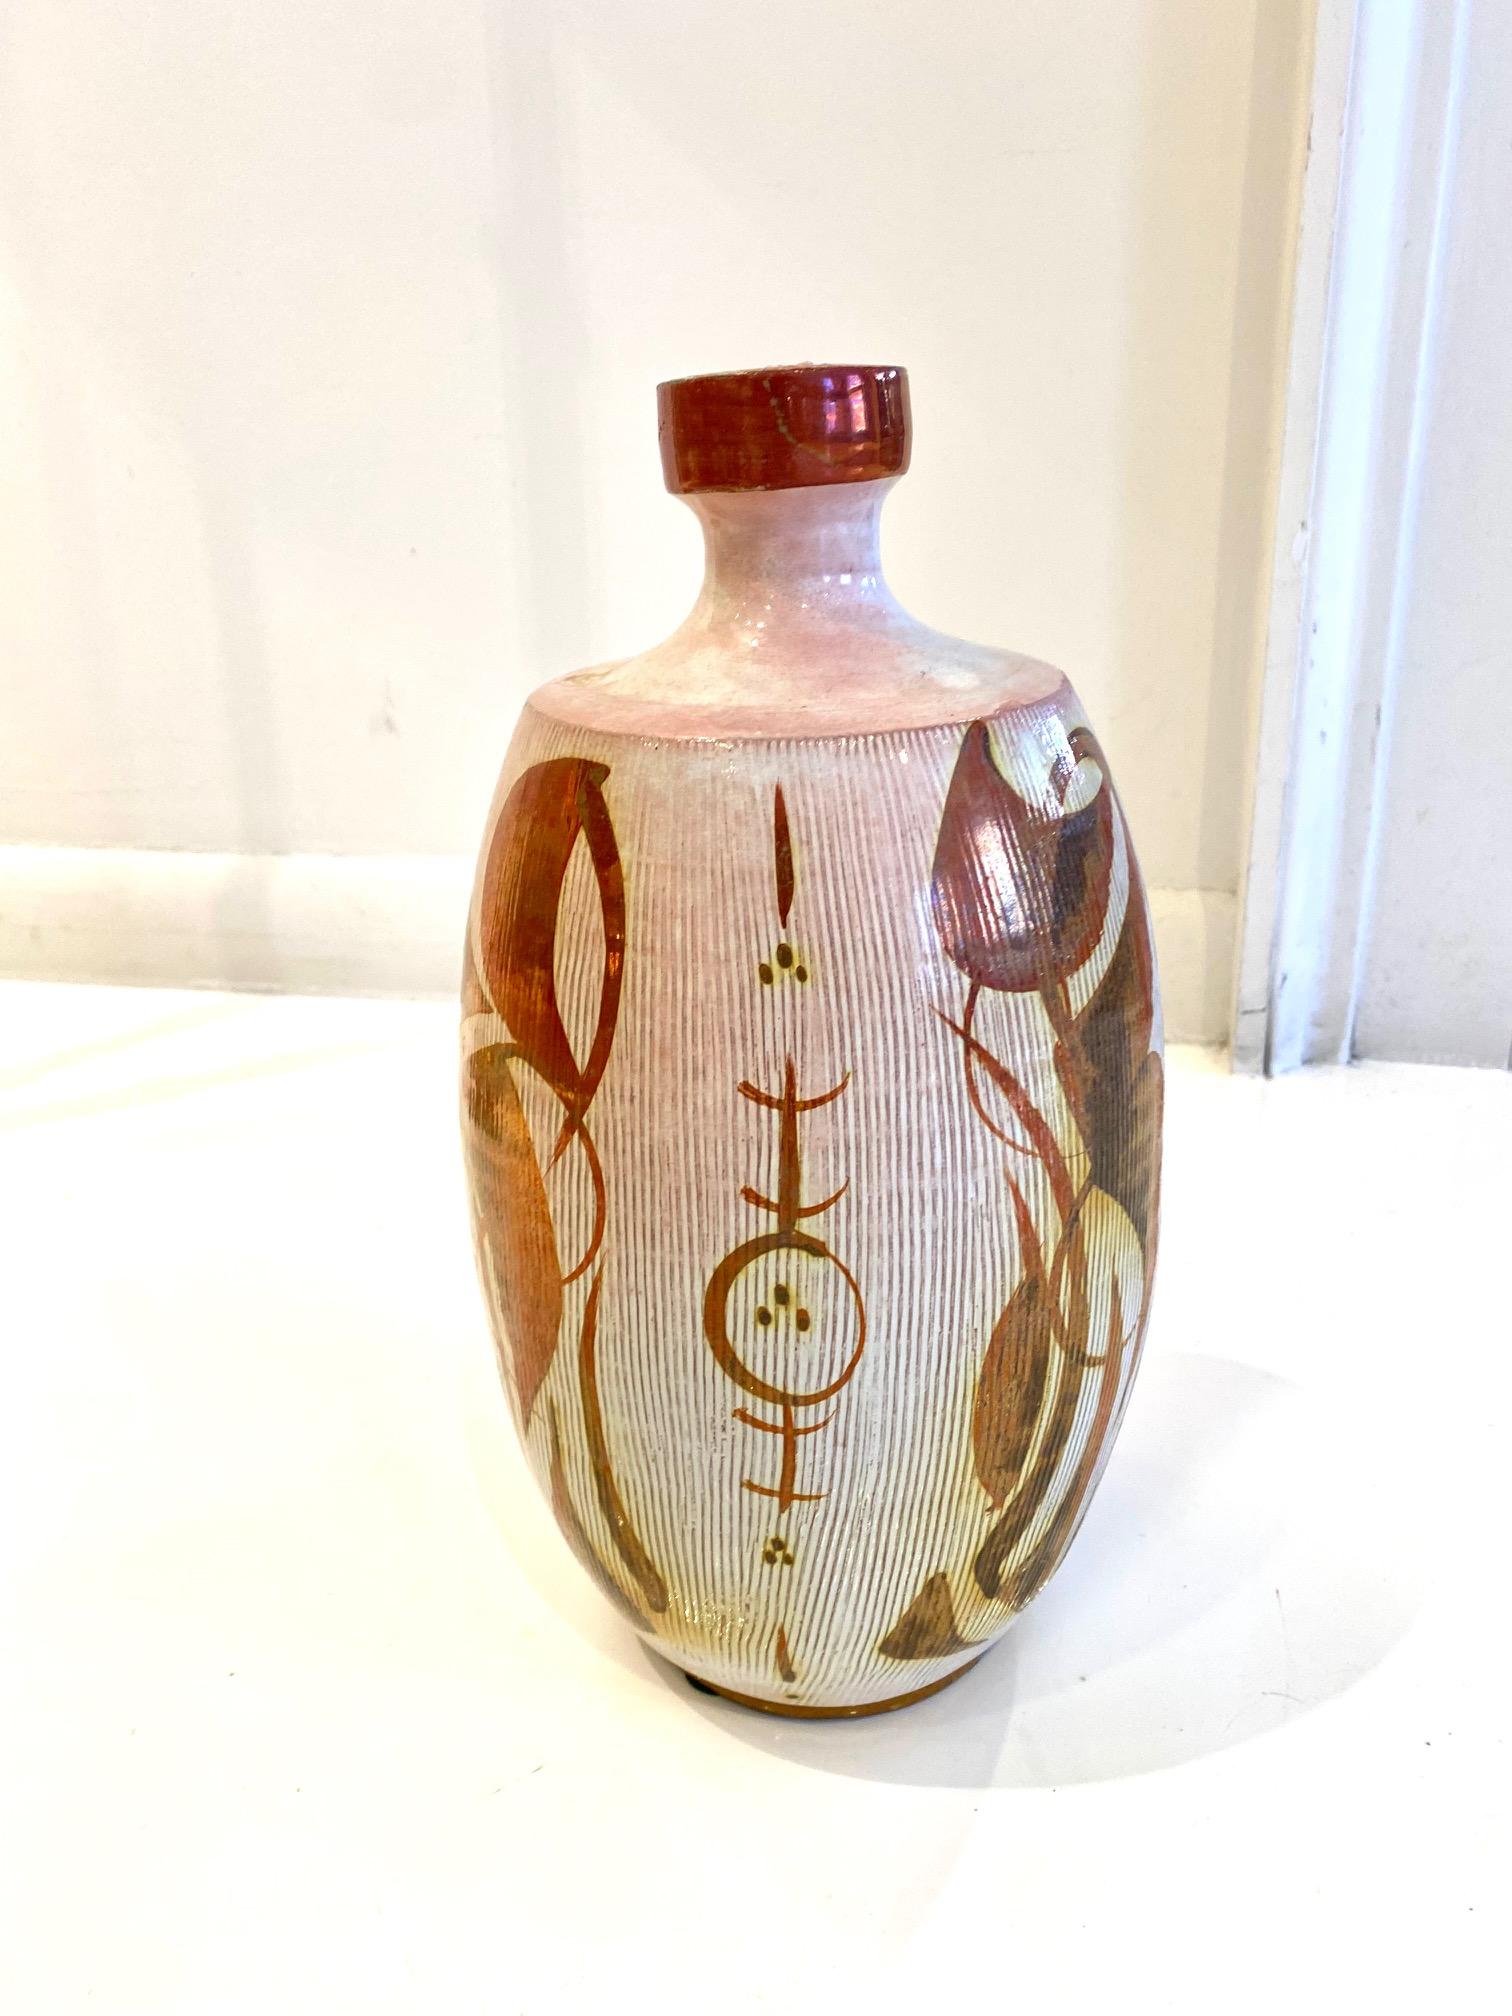 Rust and White Ceramic Bottle by Alan Caiger Smith
marked: 